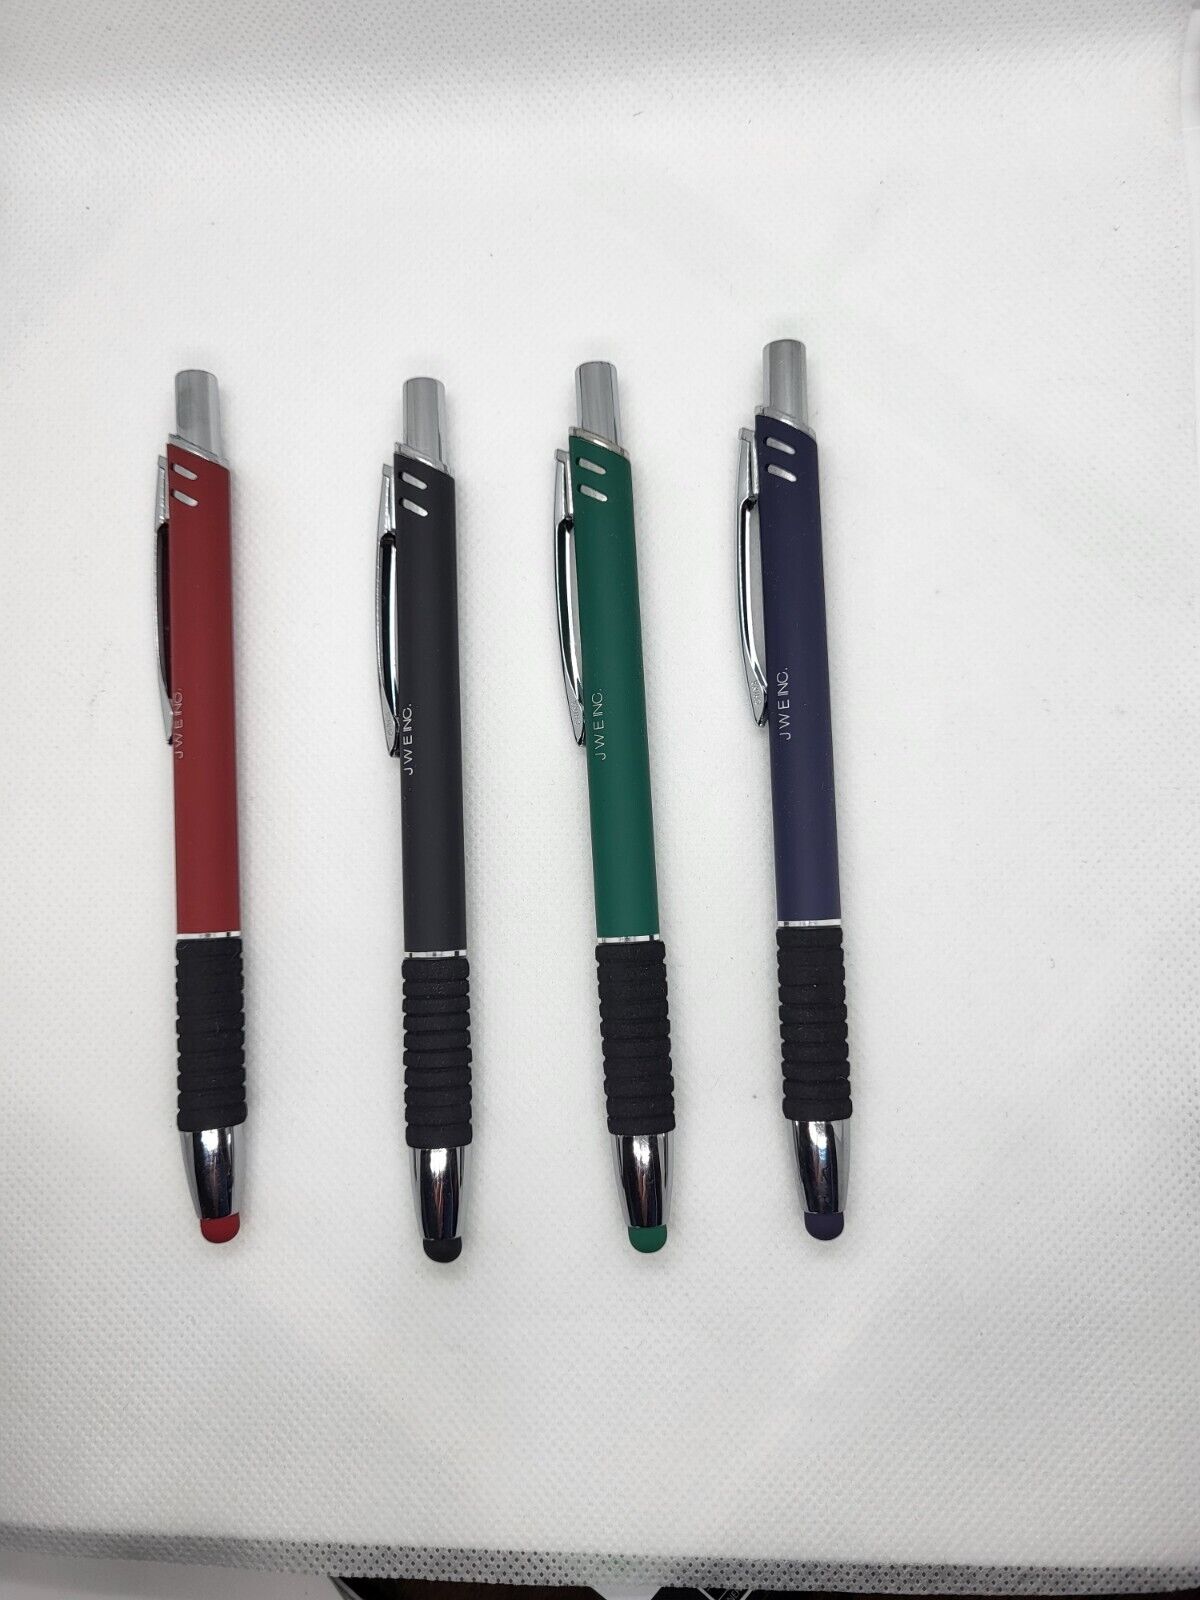 Stylus-pen;4 Soft Touch ALEGRIA PEN with Foam Grip and Stylus tip,  by JWE Inc. 